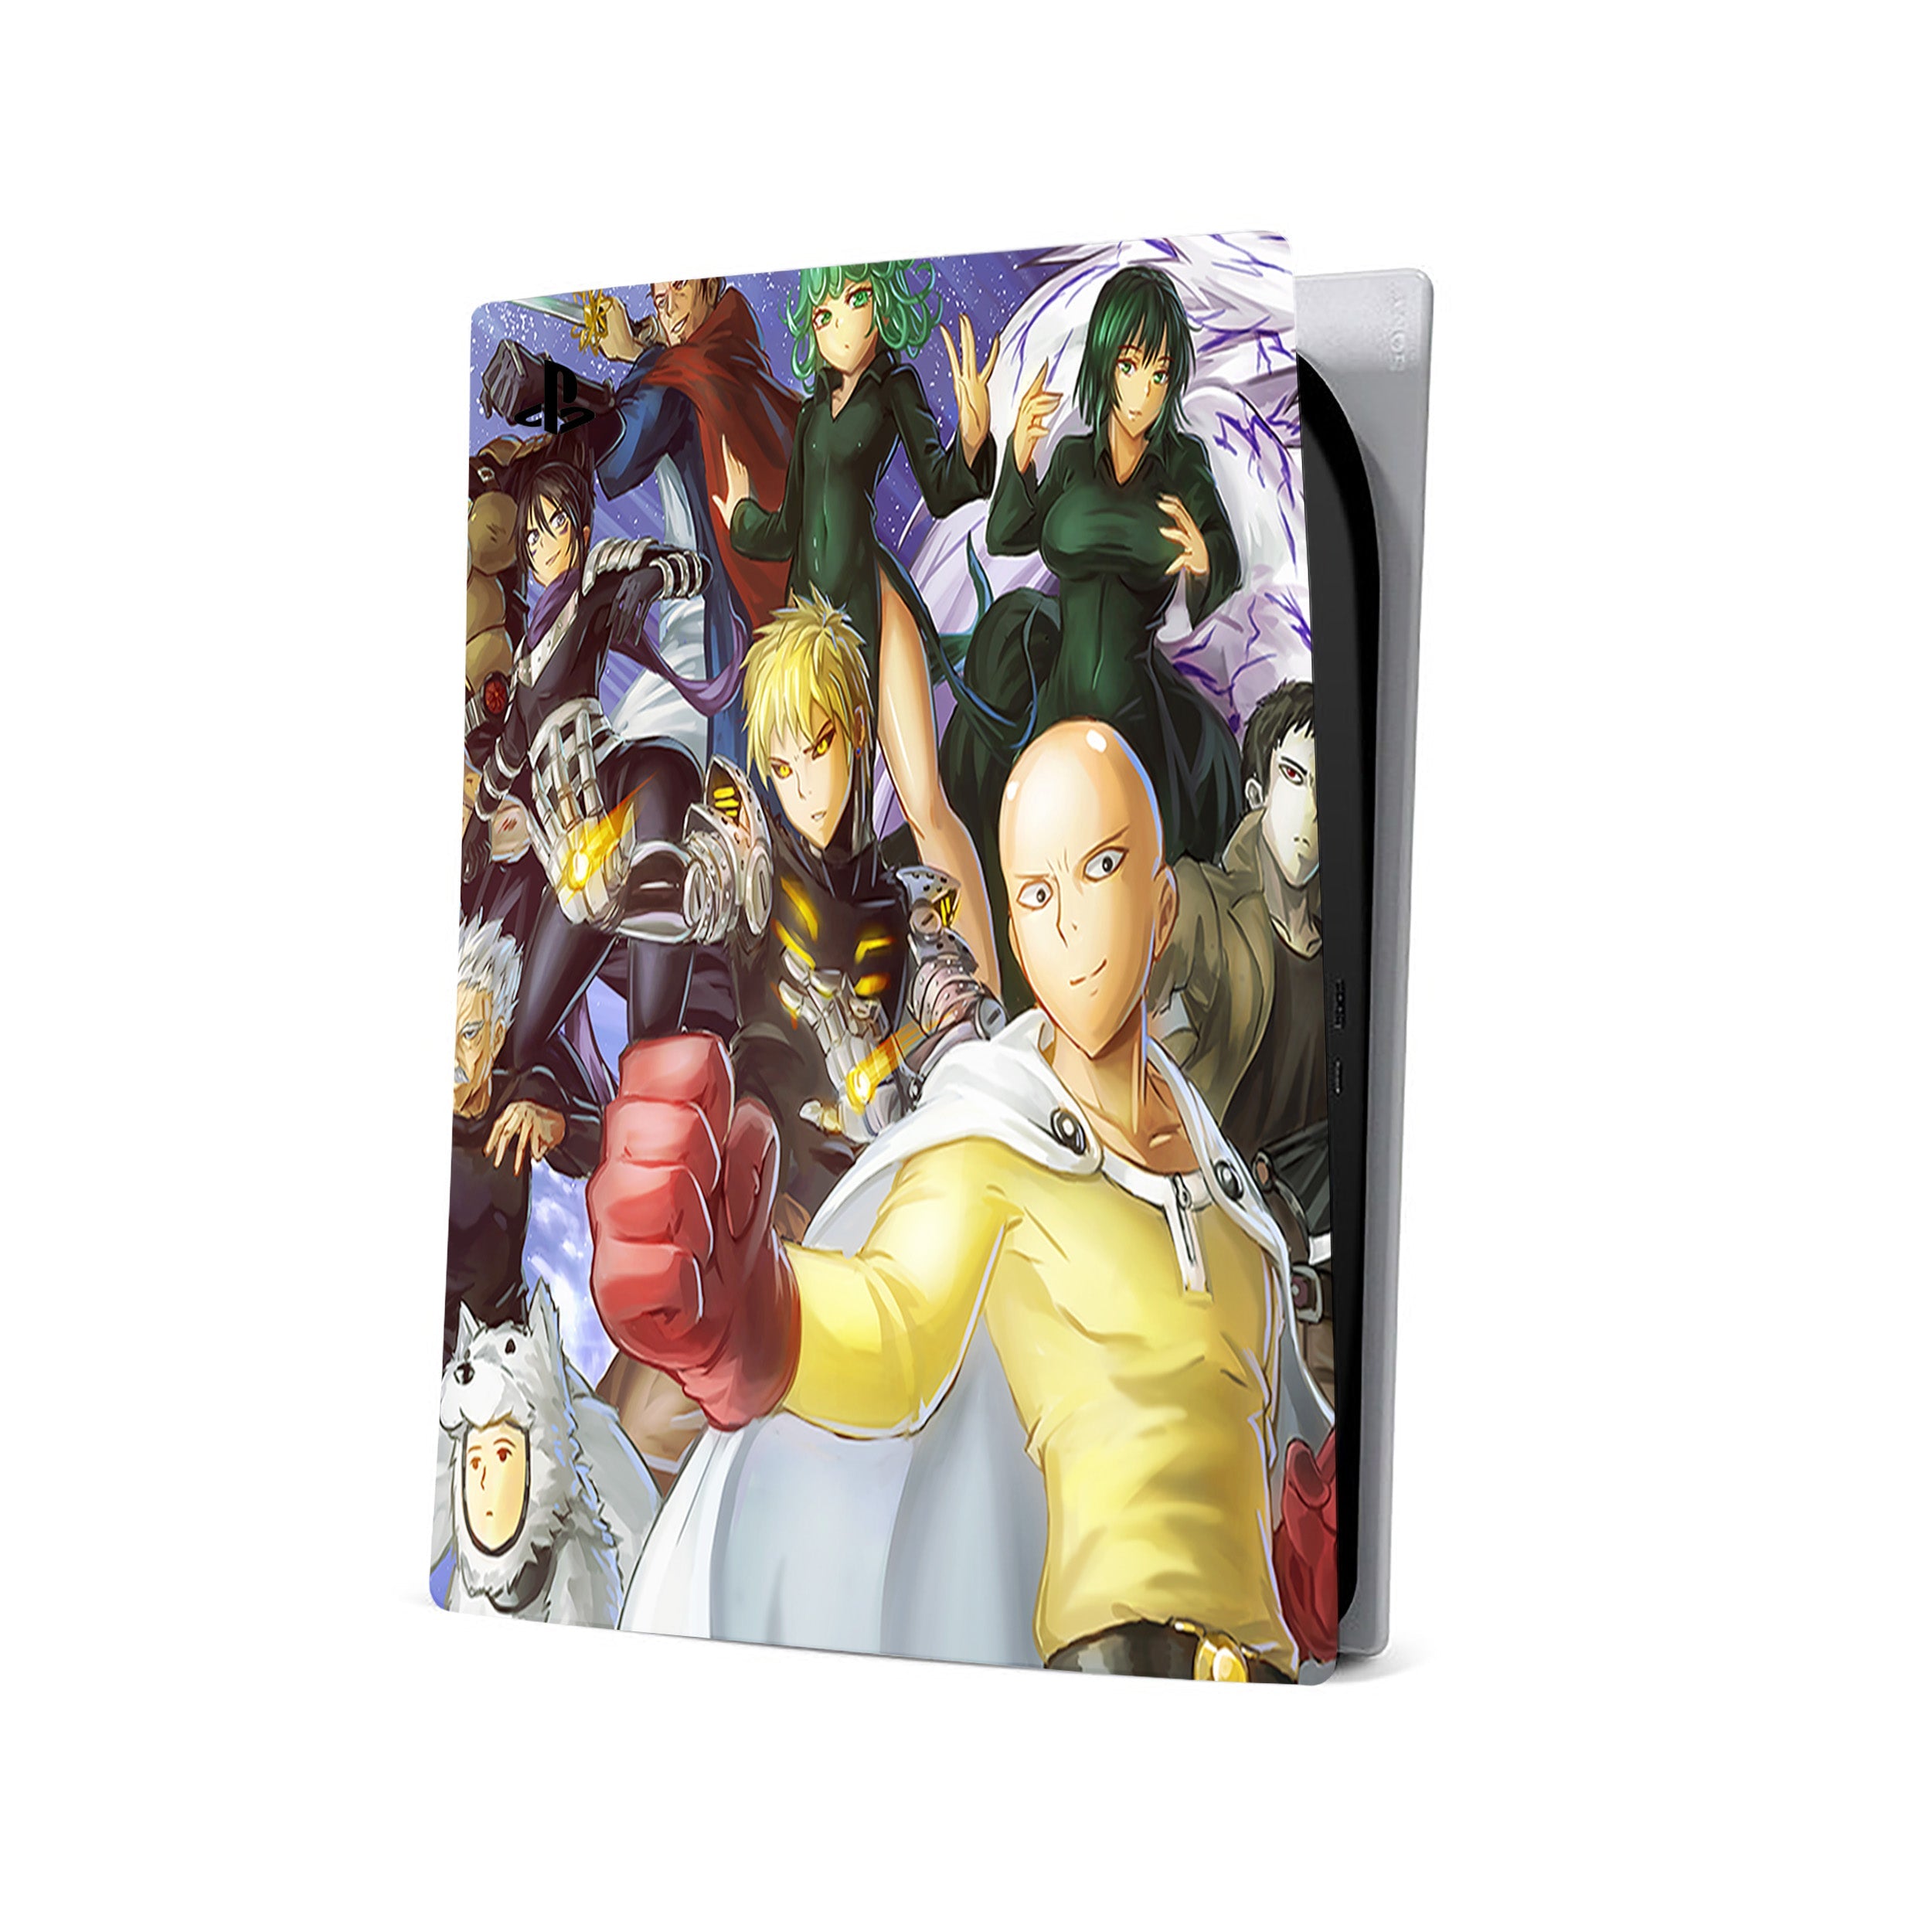 A video game skin featuring a One Punch Man design for the PS5.